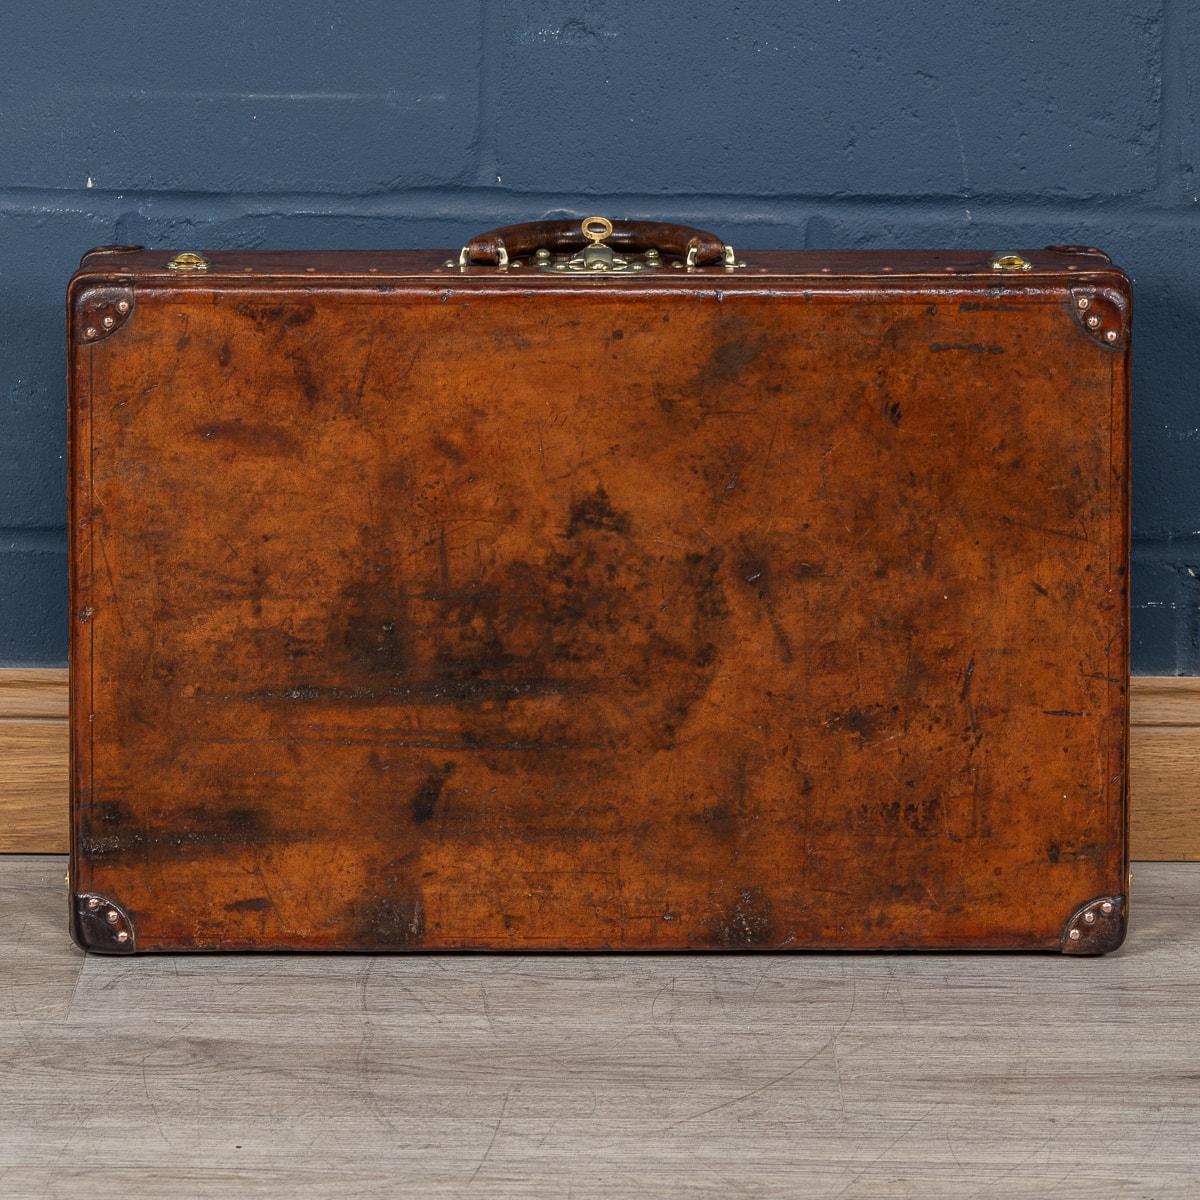 20th Century Louis Vuitton Suitcase In Natural Cow Hide, France c.1910 For Sale 2